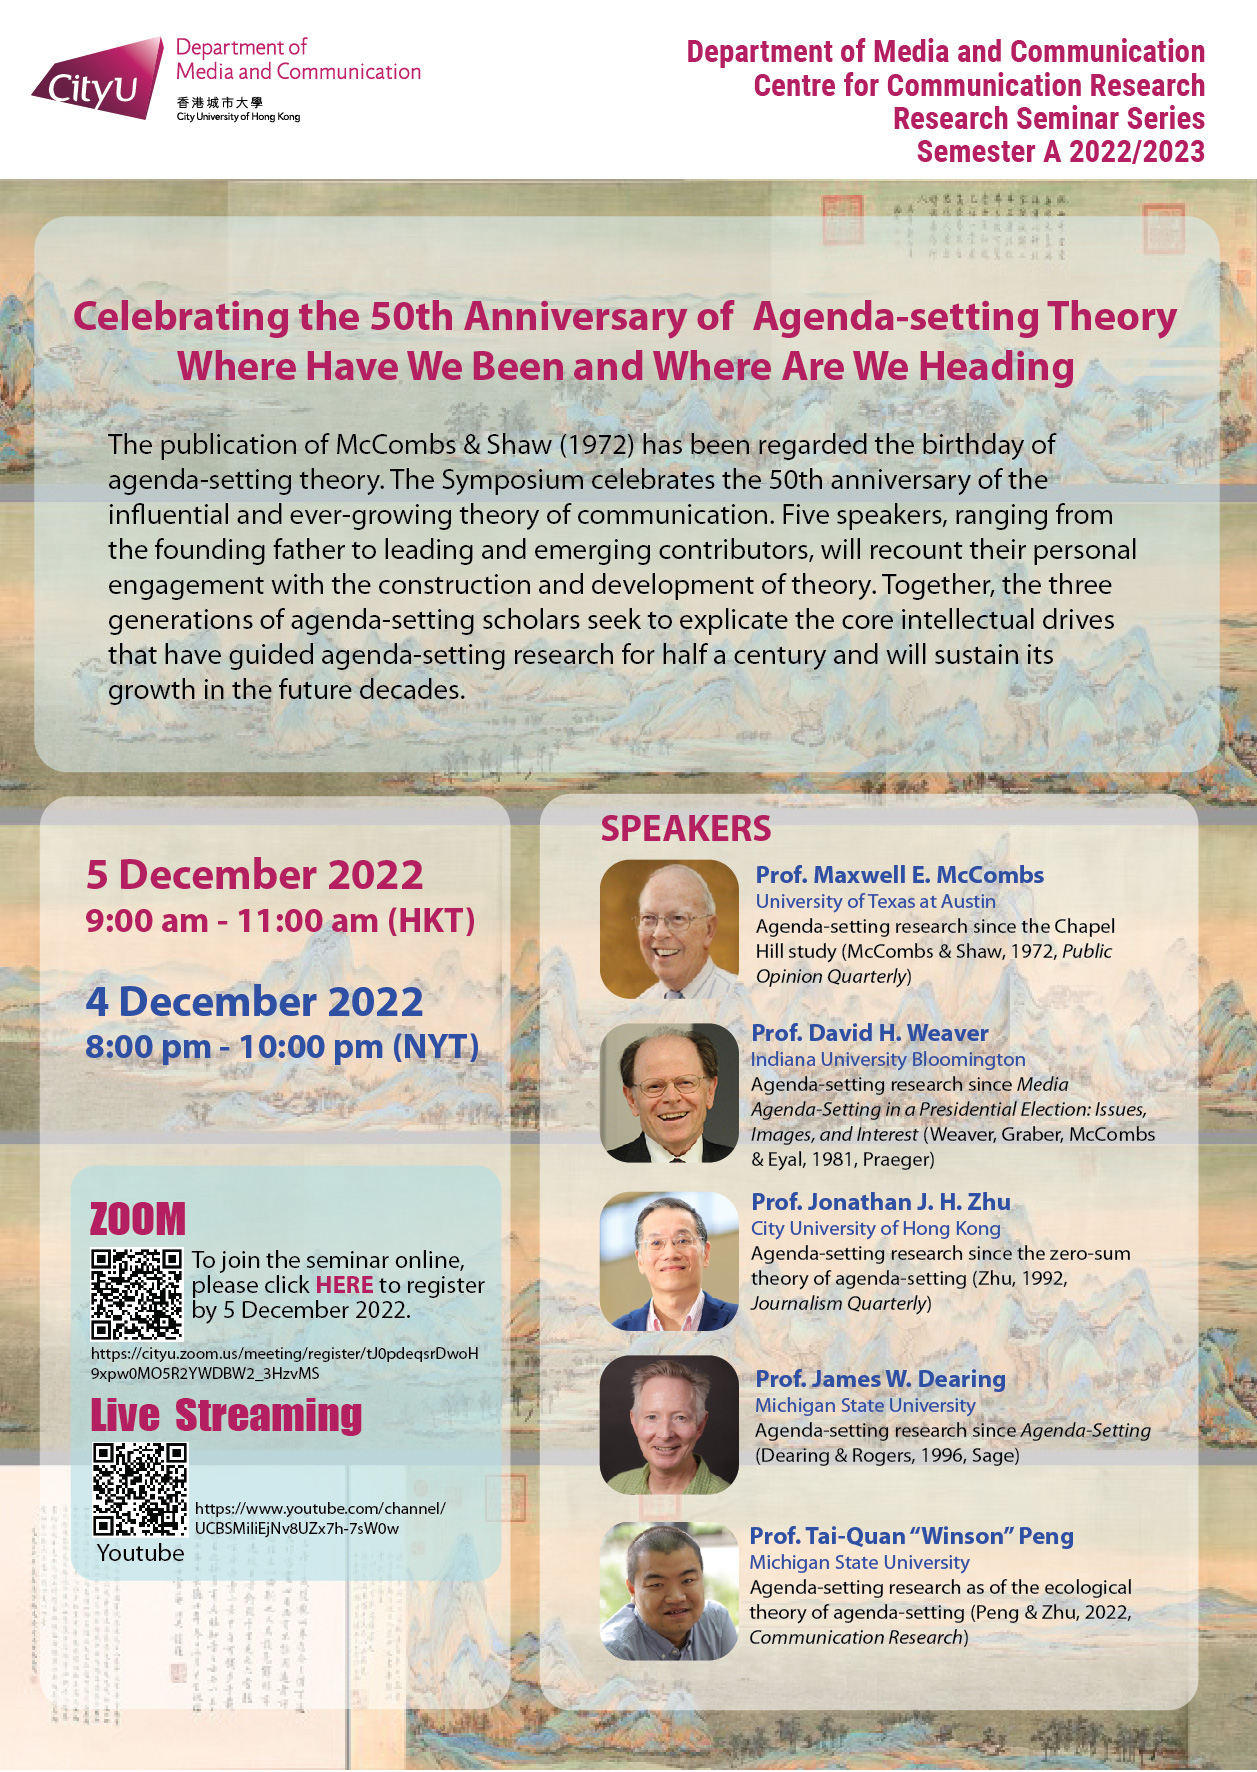 COM Research Seminar: COM Research Seminar: Celebrating the 50th Anniversary of Agenda-setting Theory Where Have We Been and Where Are We Heading. Date & Time: 5 December 2022, 9:00 am - 11:00 am (HKT). Venue: ZOOM Meeting, Please click https://cityu.zoom.us/meeting/register/tJ0pdeqsrDwoH9xpw0MO5R2YWDBW2_3HzvMS to register for the seminar by 5 December 2022. Live Streaming (Youtube): https://www.youtube.com/channel/UCBSMiliEjNv8UZx7h-7sW0w. Language: English. Abstract The publication of McCombs & Shaw (1972) has been regarded the birthday of agenda-setting theory. The Symposium celebrates the 50th anniversary of the influential and ever-growing theory of communication. Five speakers, ranging from the founding father to leading and emerging contributors, will recount their personal engagement with the construction and development of theory. Together, the three generations of agenda-setting scholars seek to explicate the core intellectual drives that have guided agenda-setting research for half a century and will sustain its growth in the future decades. About the speaker: Prof. Maxwell E. McCombs, University of Texas at Austin; Agenda-setting research since the Chapel Hill study (McCombs & Shaw, 1972, Public Opinion Quarterly); Prof. David H. Weaver, Indiana University Bloomington, Agenda-setting research since Media Agenda-Setting in a Presidential Election: Issues, Images, and Interest (Weaver, Graber, McCombs & Eyal, 1981, Praeger); Prof. Jonathan J. H. Zhu, City University of Hong Kong, Agenda-setting research since the zero-sum theory of agenda-setting (Zhu, 1992, Journalism Quarterly); Prof. James W. Dearing, Michigan State University, Agenda-setting research since Agenda-Setting (Dearing & Rogers, 1996, Sage); Prof. Tai-Quan “Winson” Peng, Michigan State University, Agenda-setting research as of the ecological theory of agenda-setting (Peng & Zhu, 2022, Communication Research). For enquiries, please call 34428677.